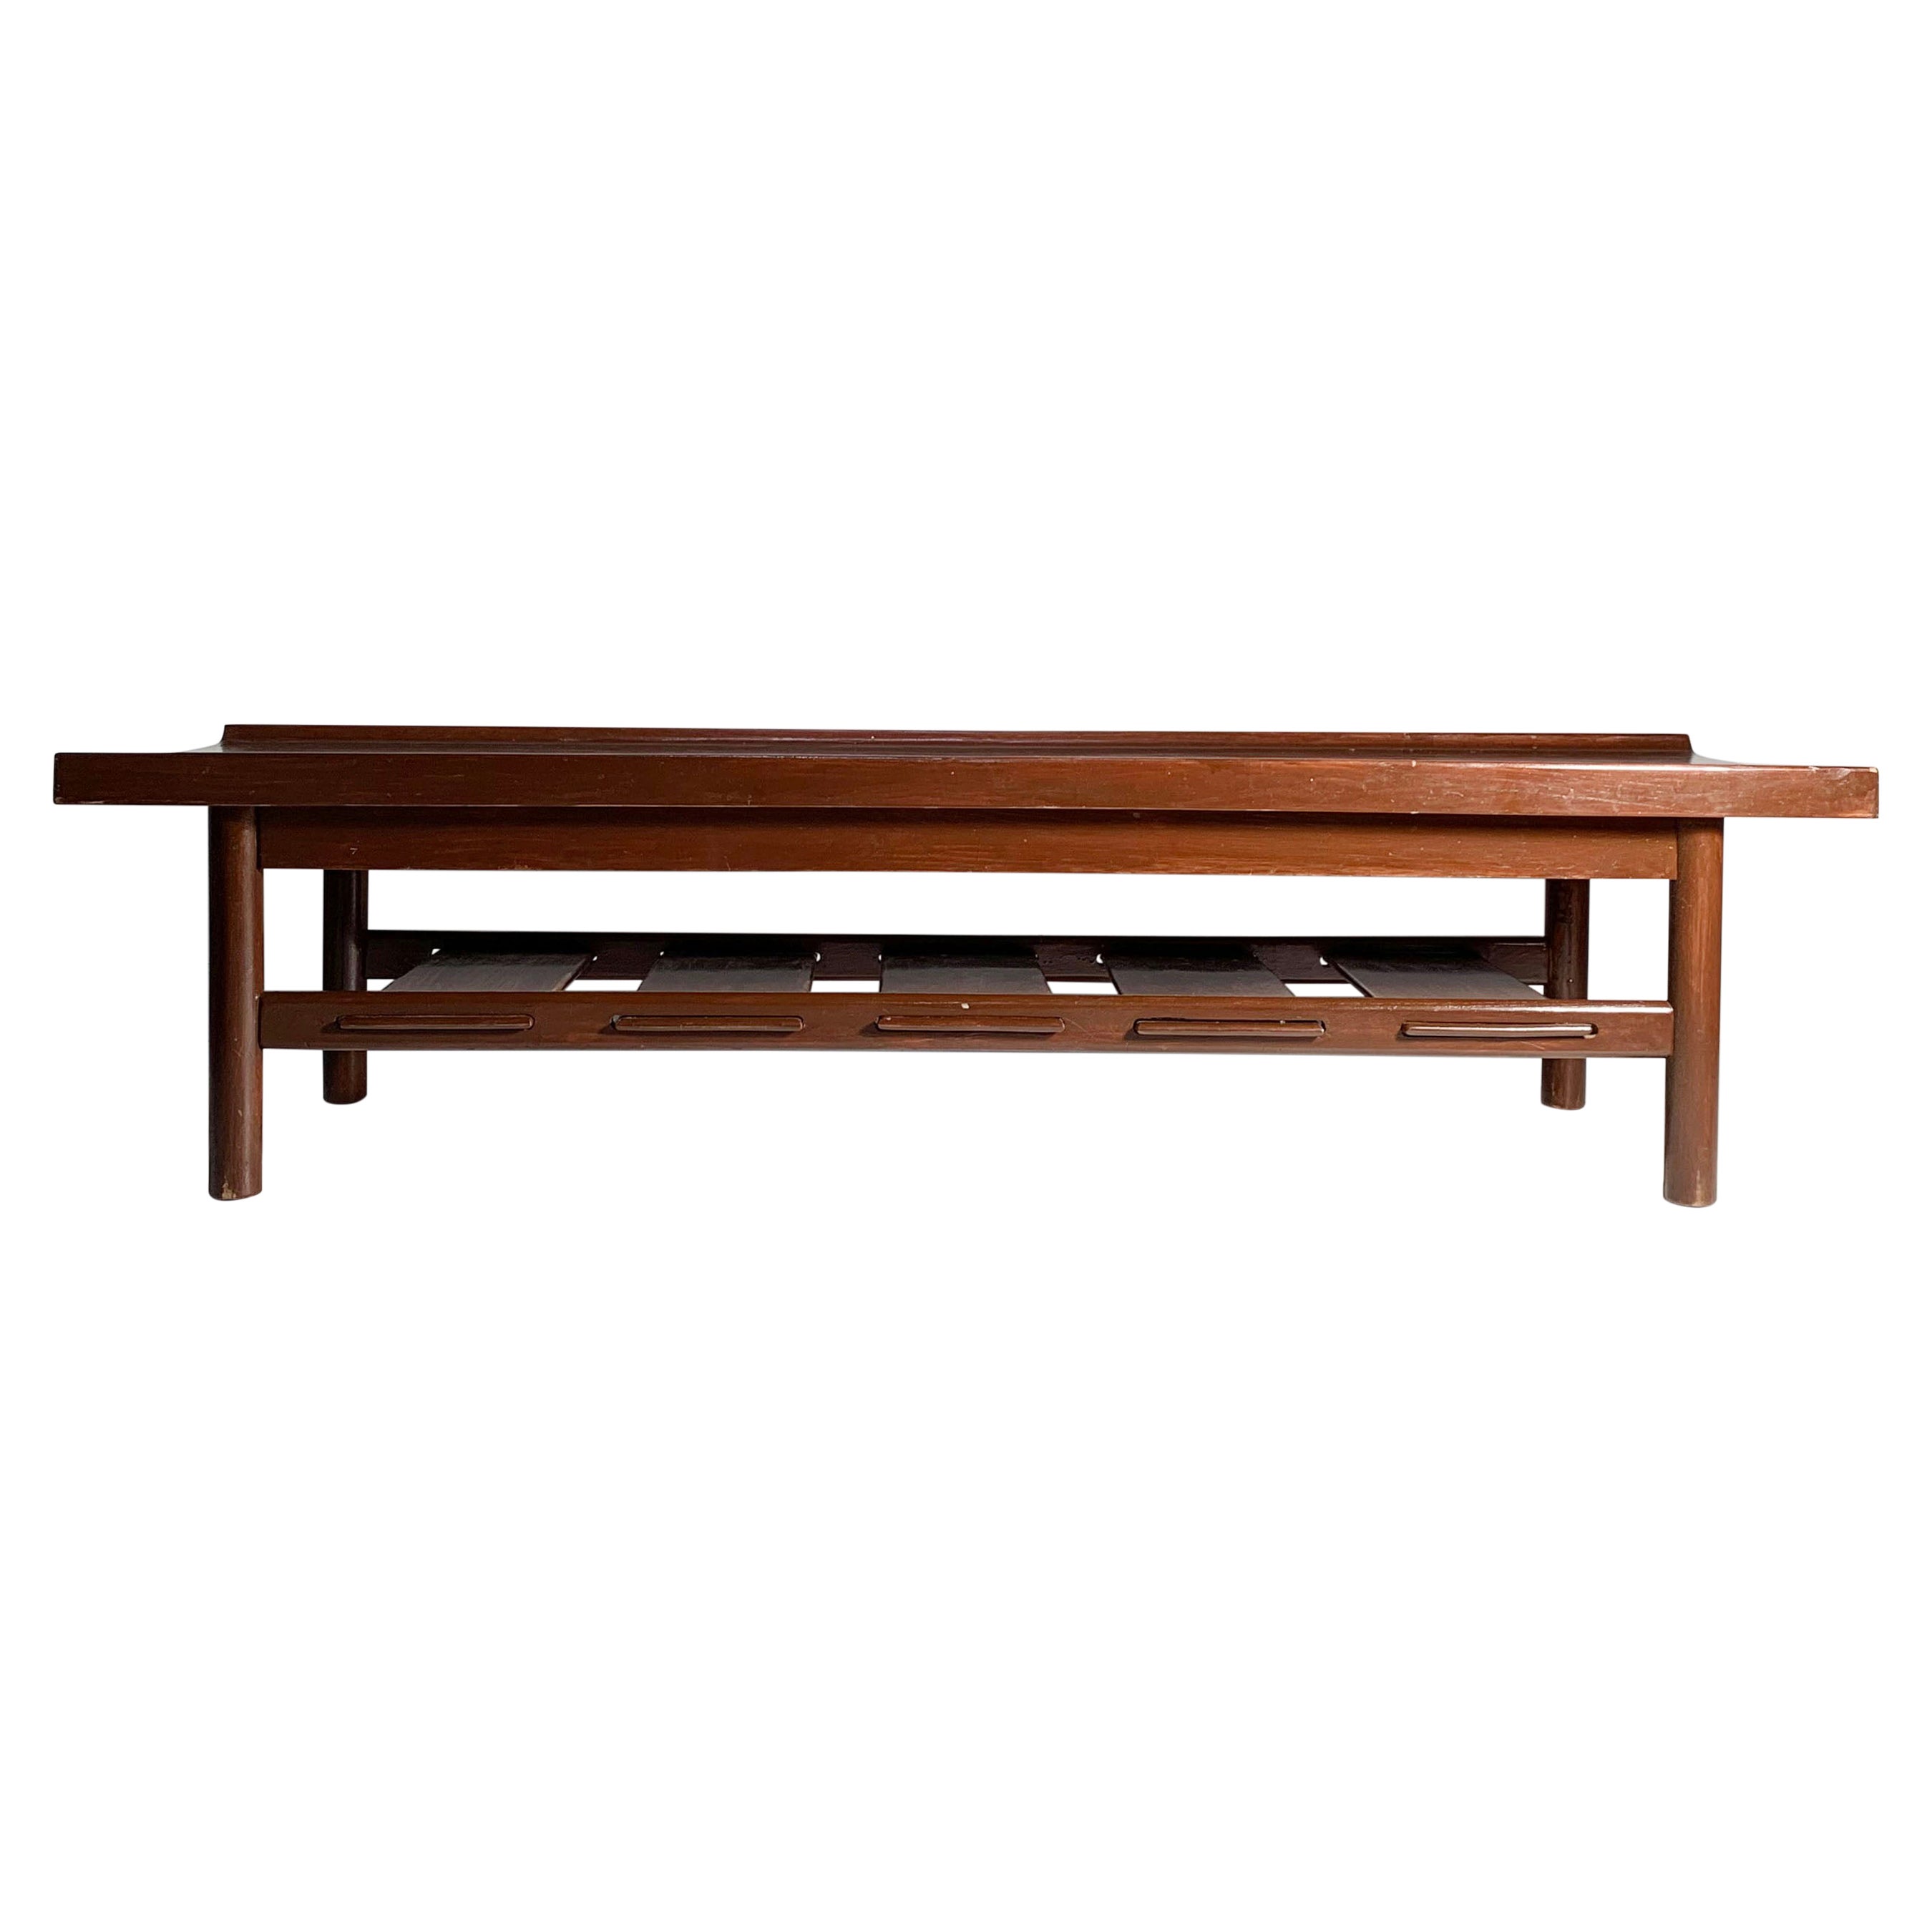 Lawrence Peabody Long Walnut Bench / Coffee Table For Richardson-Nemschoff